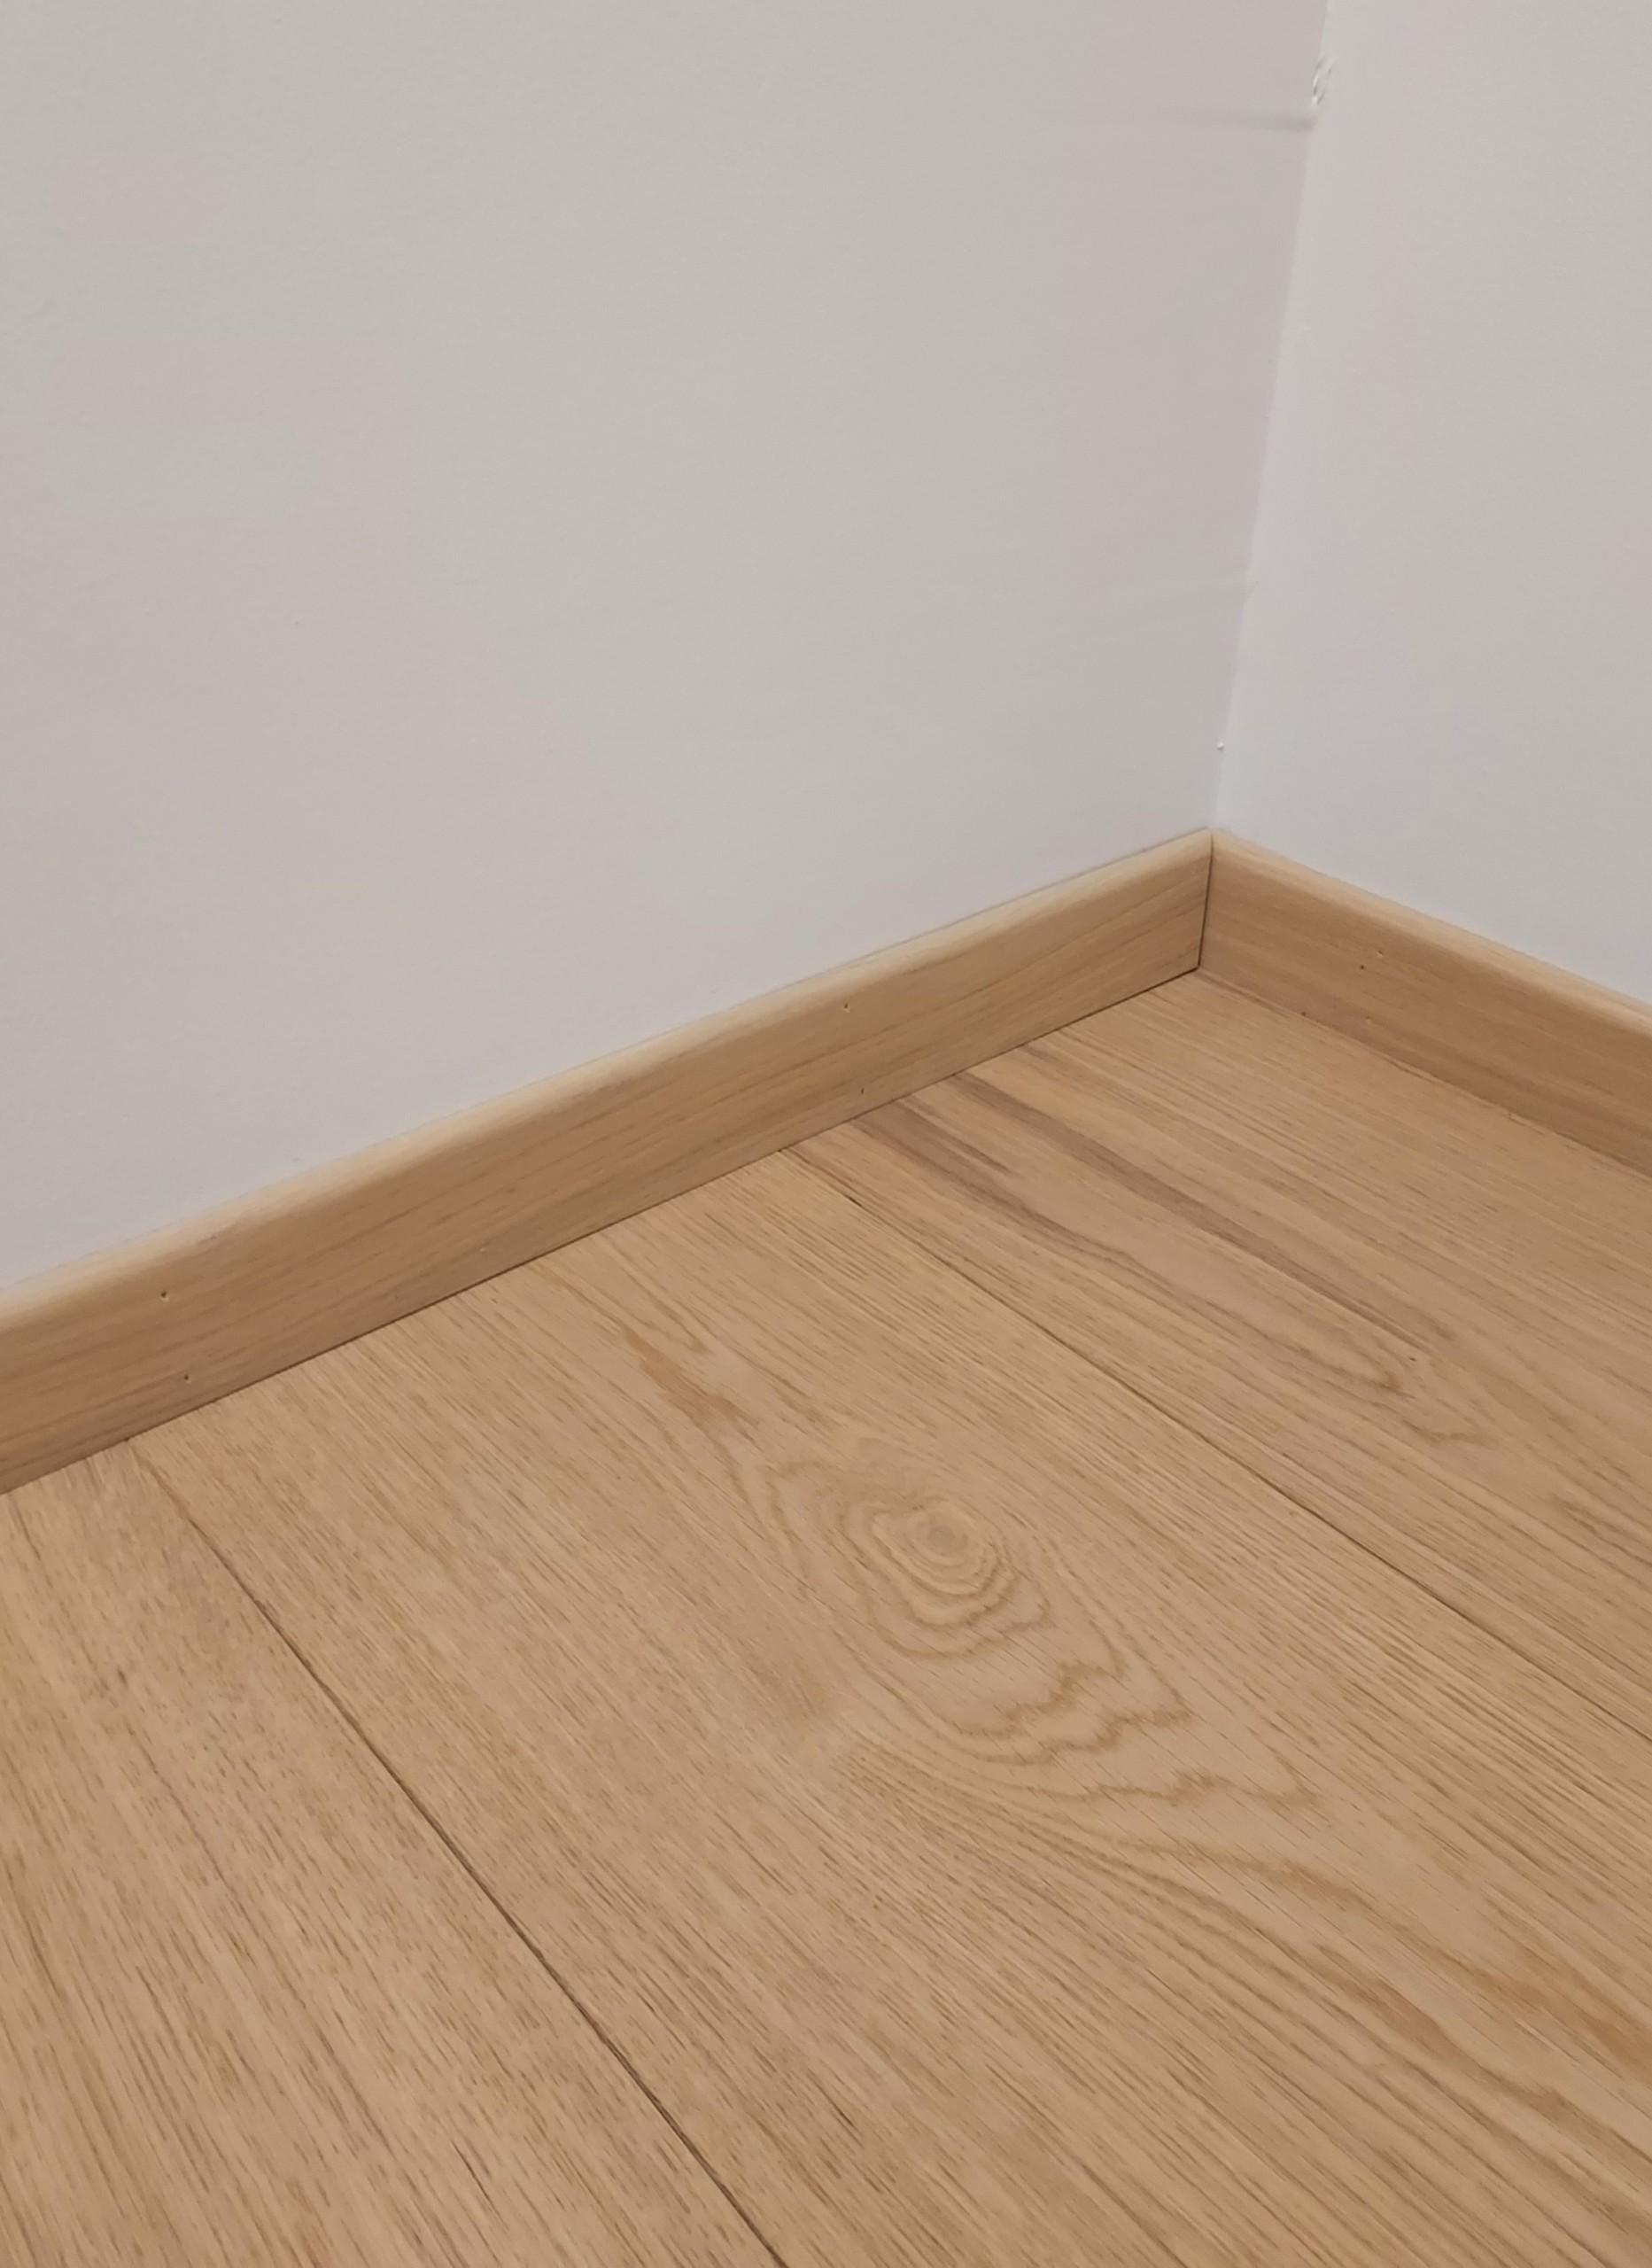 How to Fit Skirting Boards - Step by Step Guide